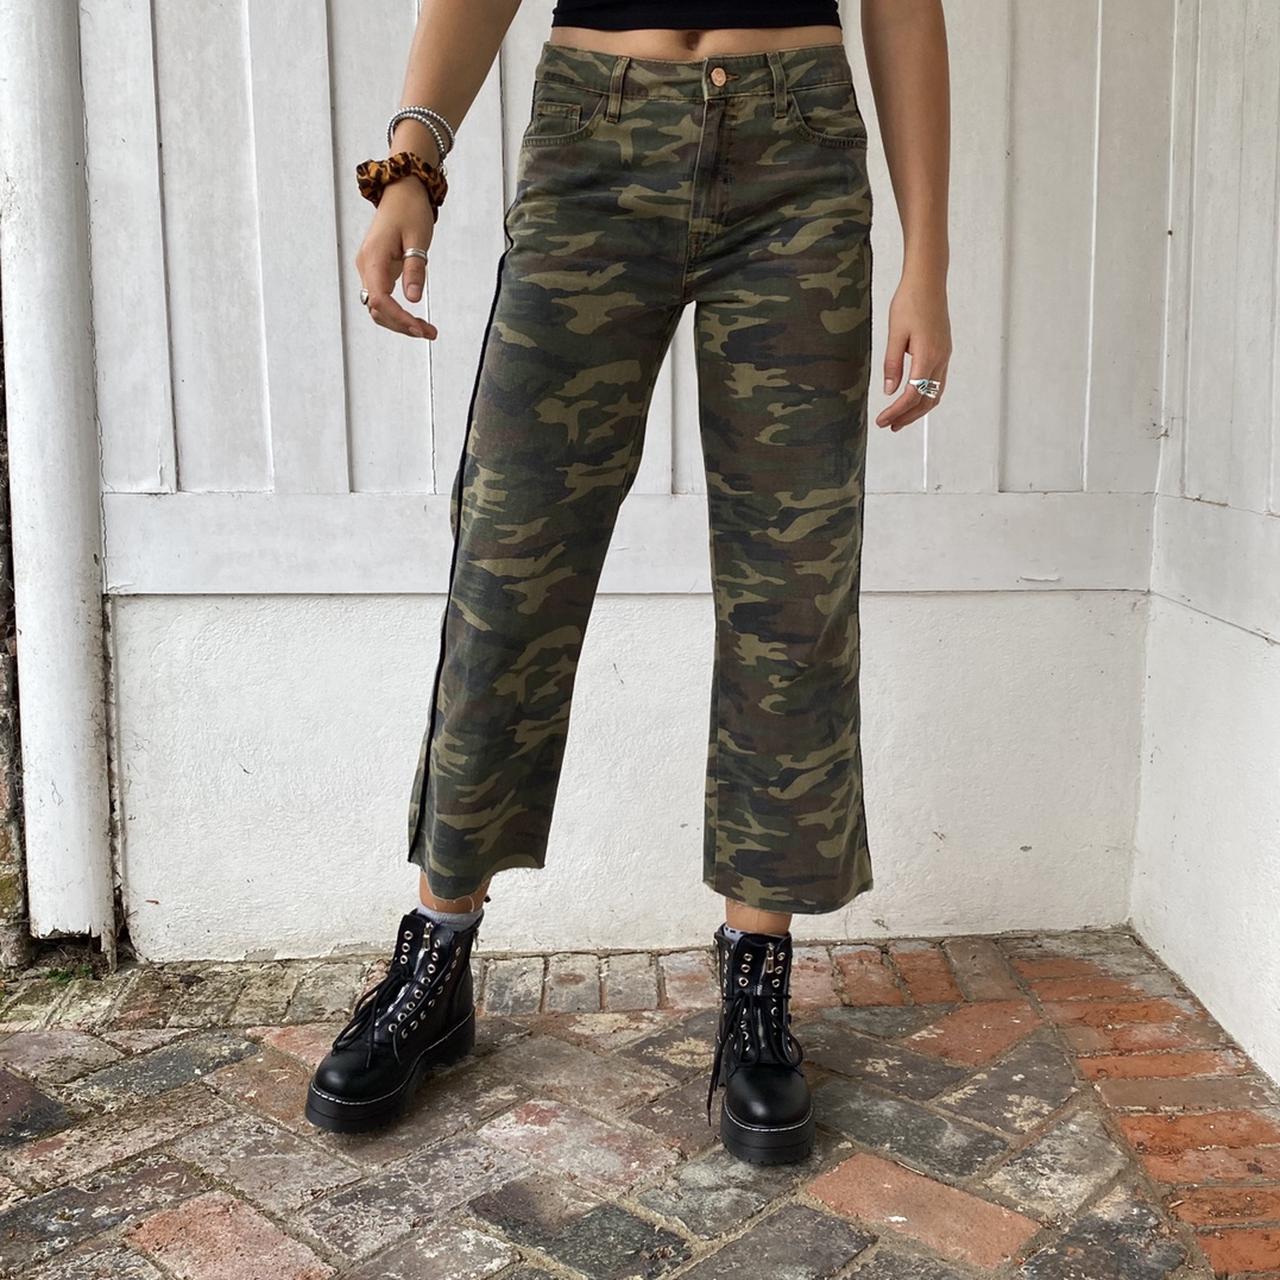 zara camouflage trousers  OFF58  Shipping free